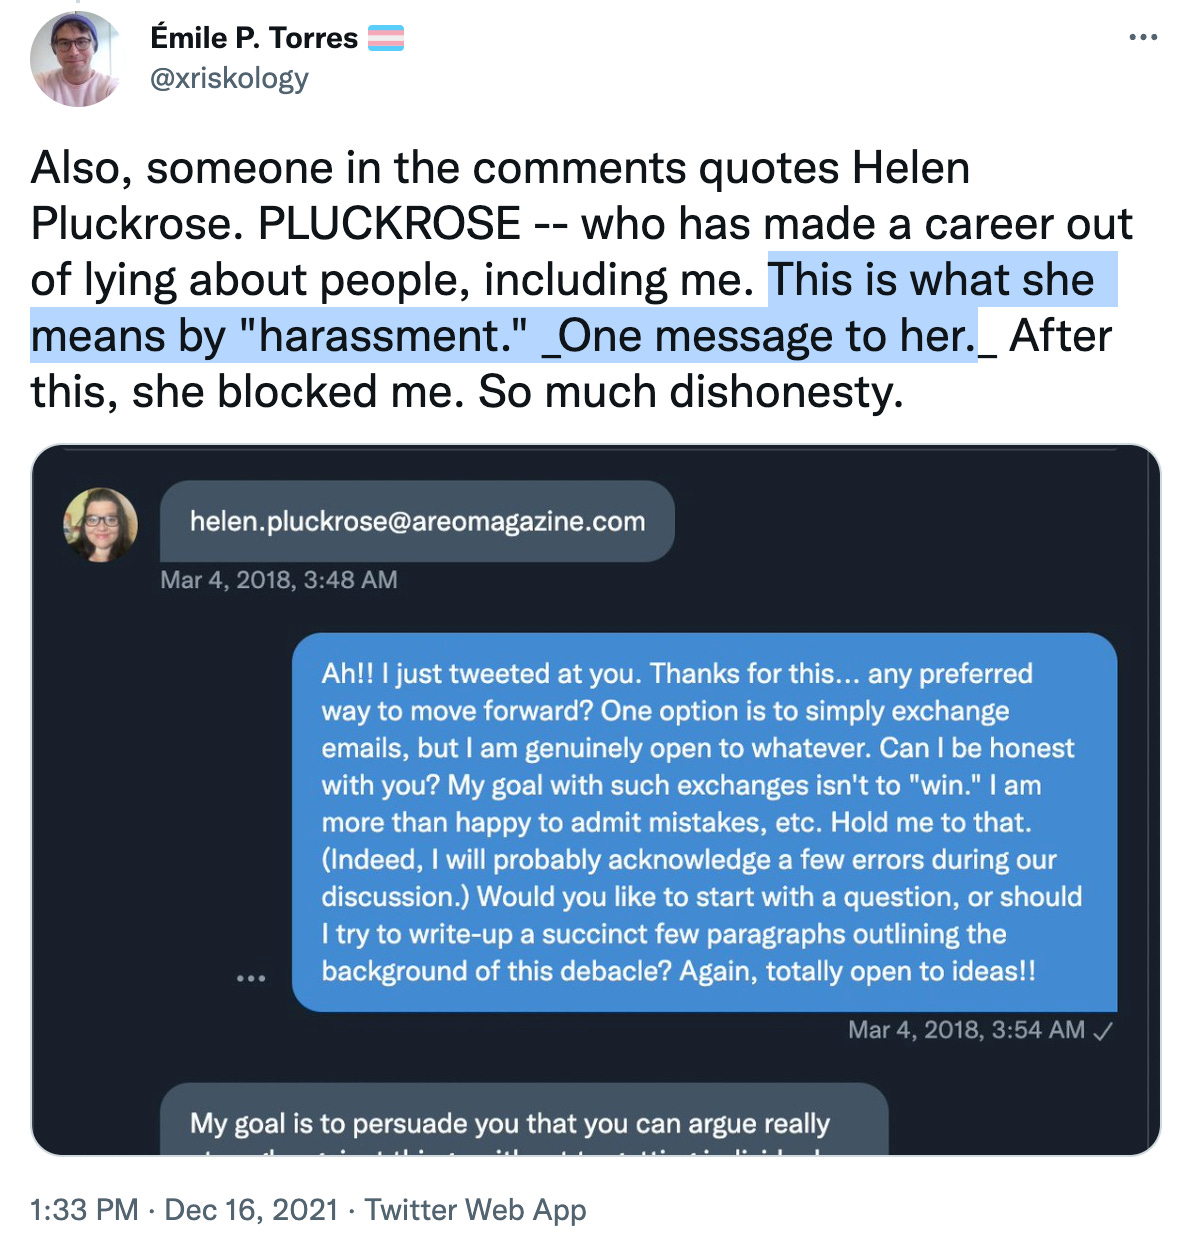 Émile P. Torres: Also, someone in the comments quotes Helen Pluckrose. PLUCKROSE, who has made a career out of lying about people, including me. This is what she means by "harassment." One message to her. After this, she blocked me. So much dishonesty.